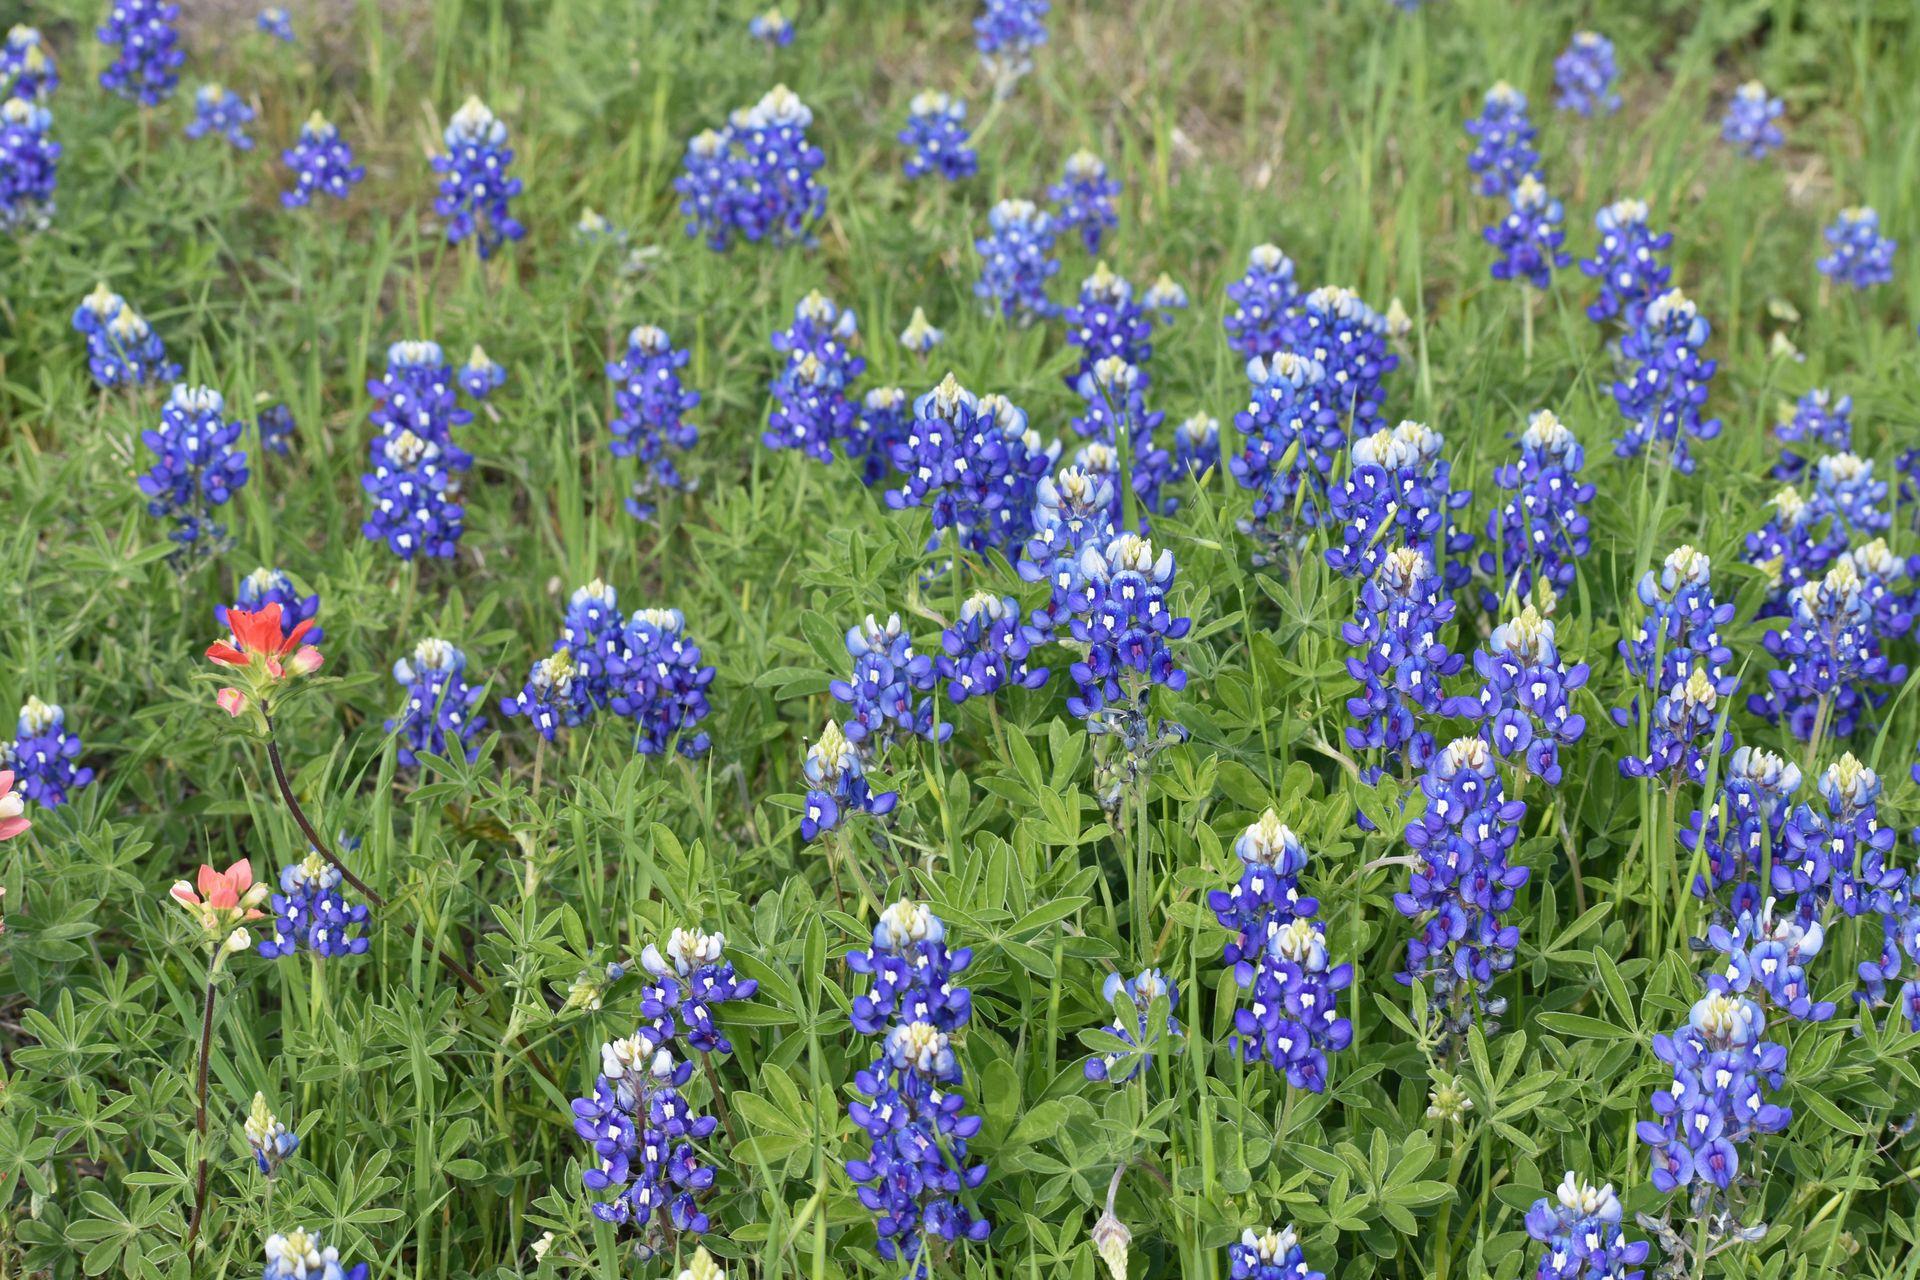 A close up look at Bluebonnets in Ennis, Texas.